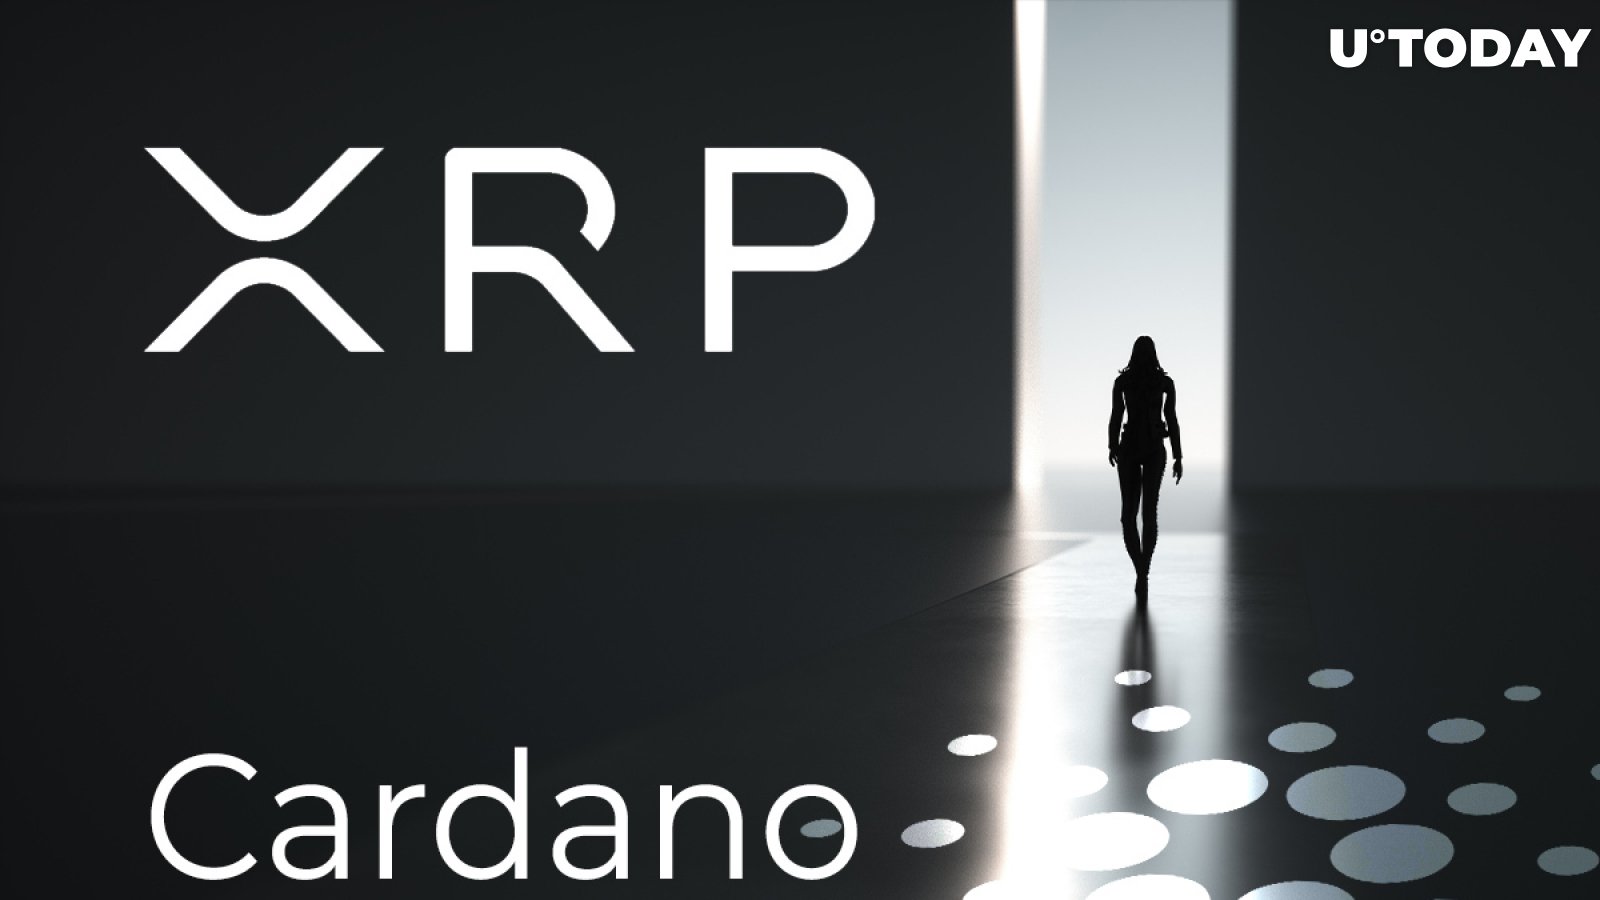 XRP About to Leave Top 5 First Time Since 2014 as Cardano (ADA) Soars 40 Percent